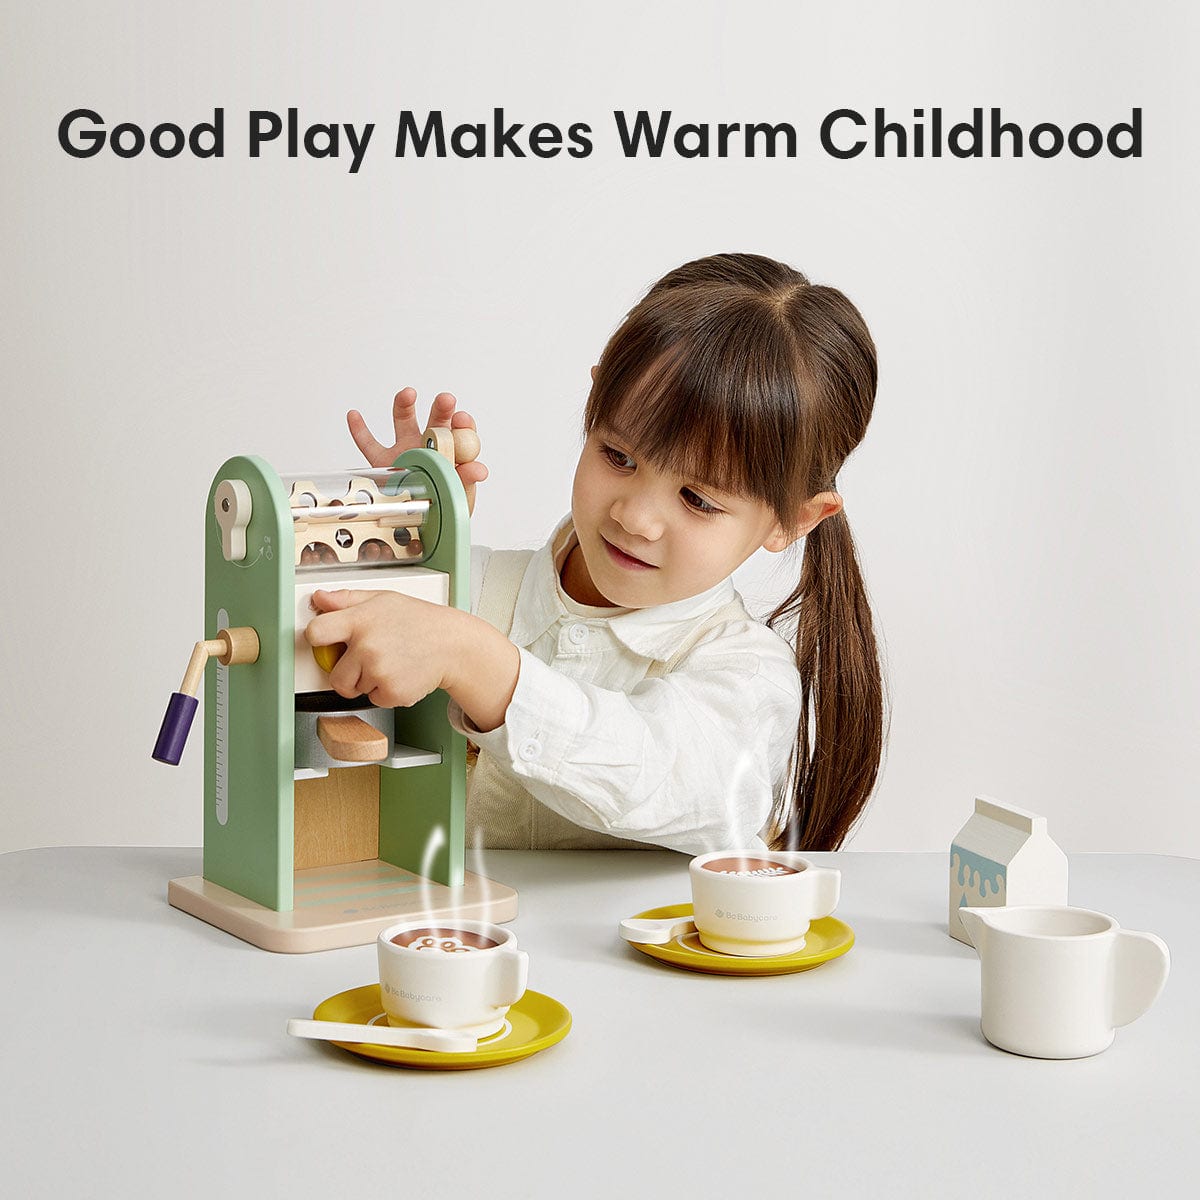 an image of a girl is playing the green coffee maker toy.